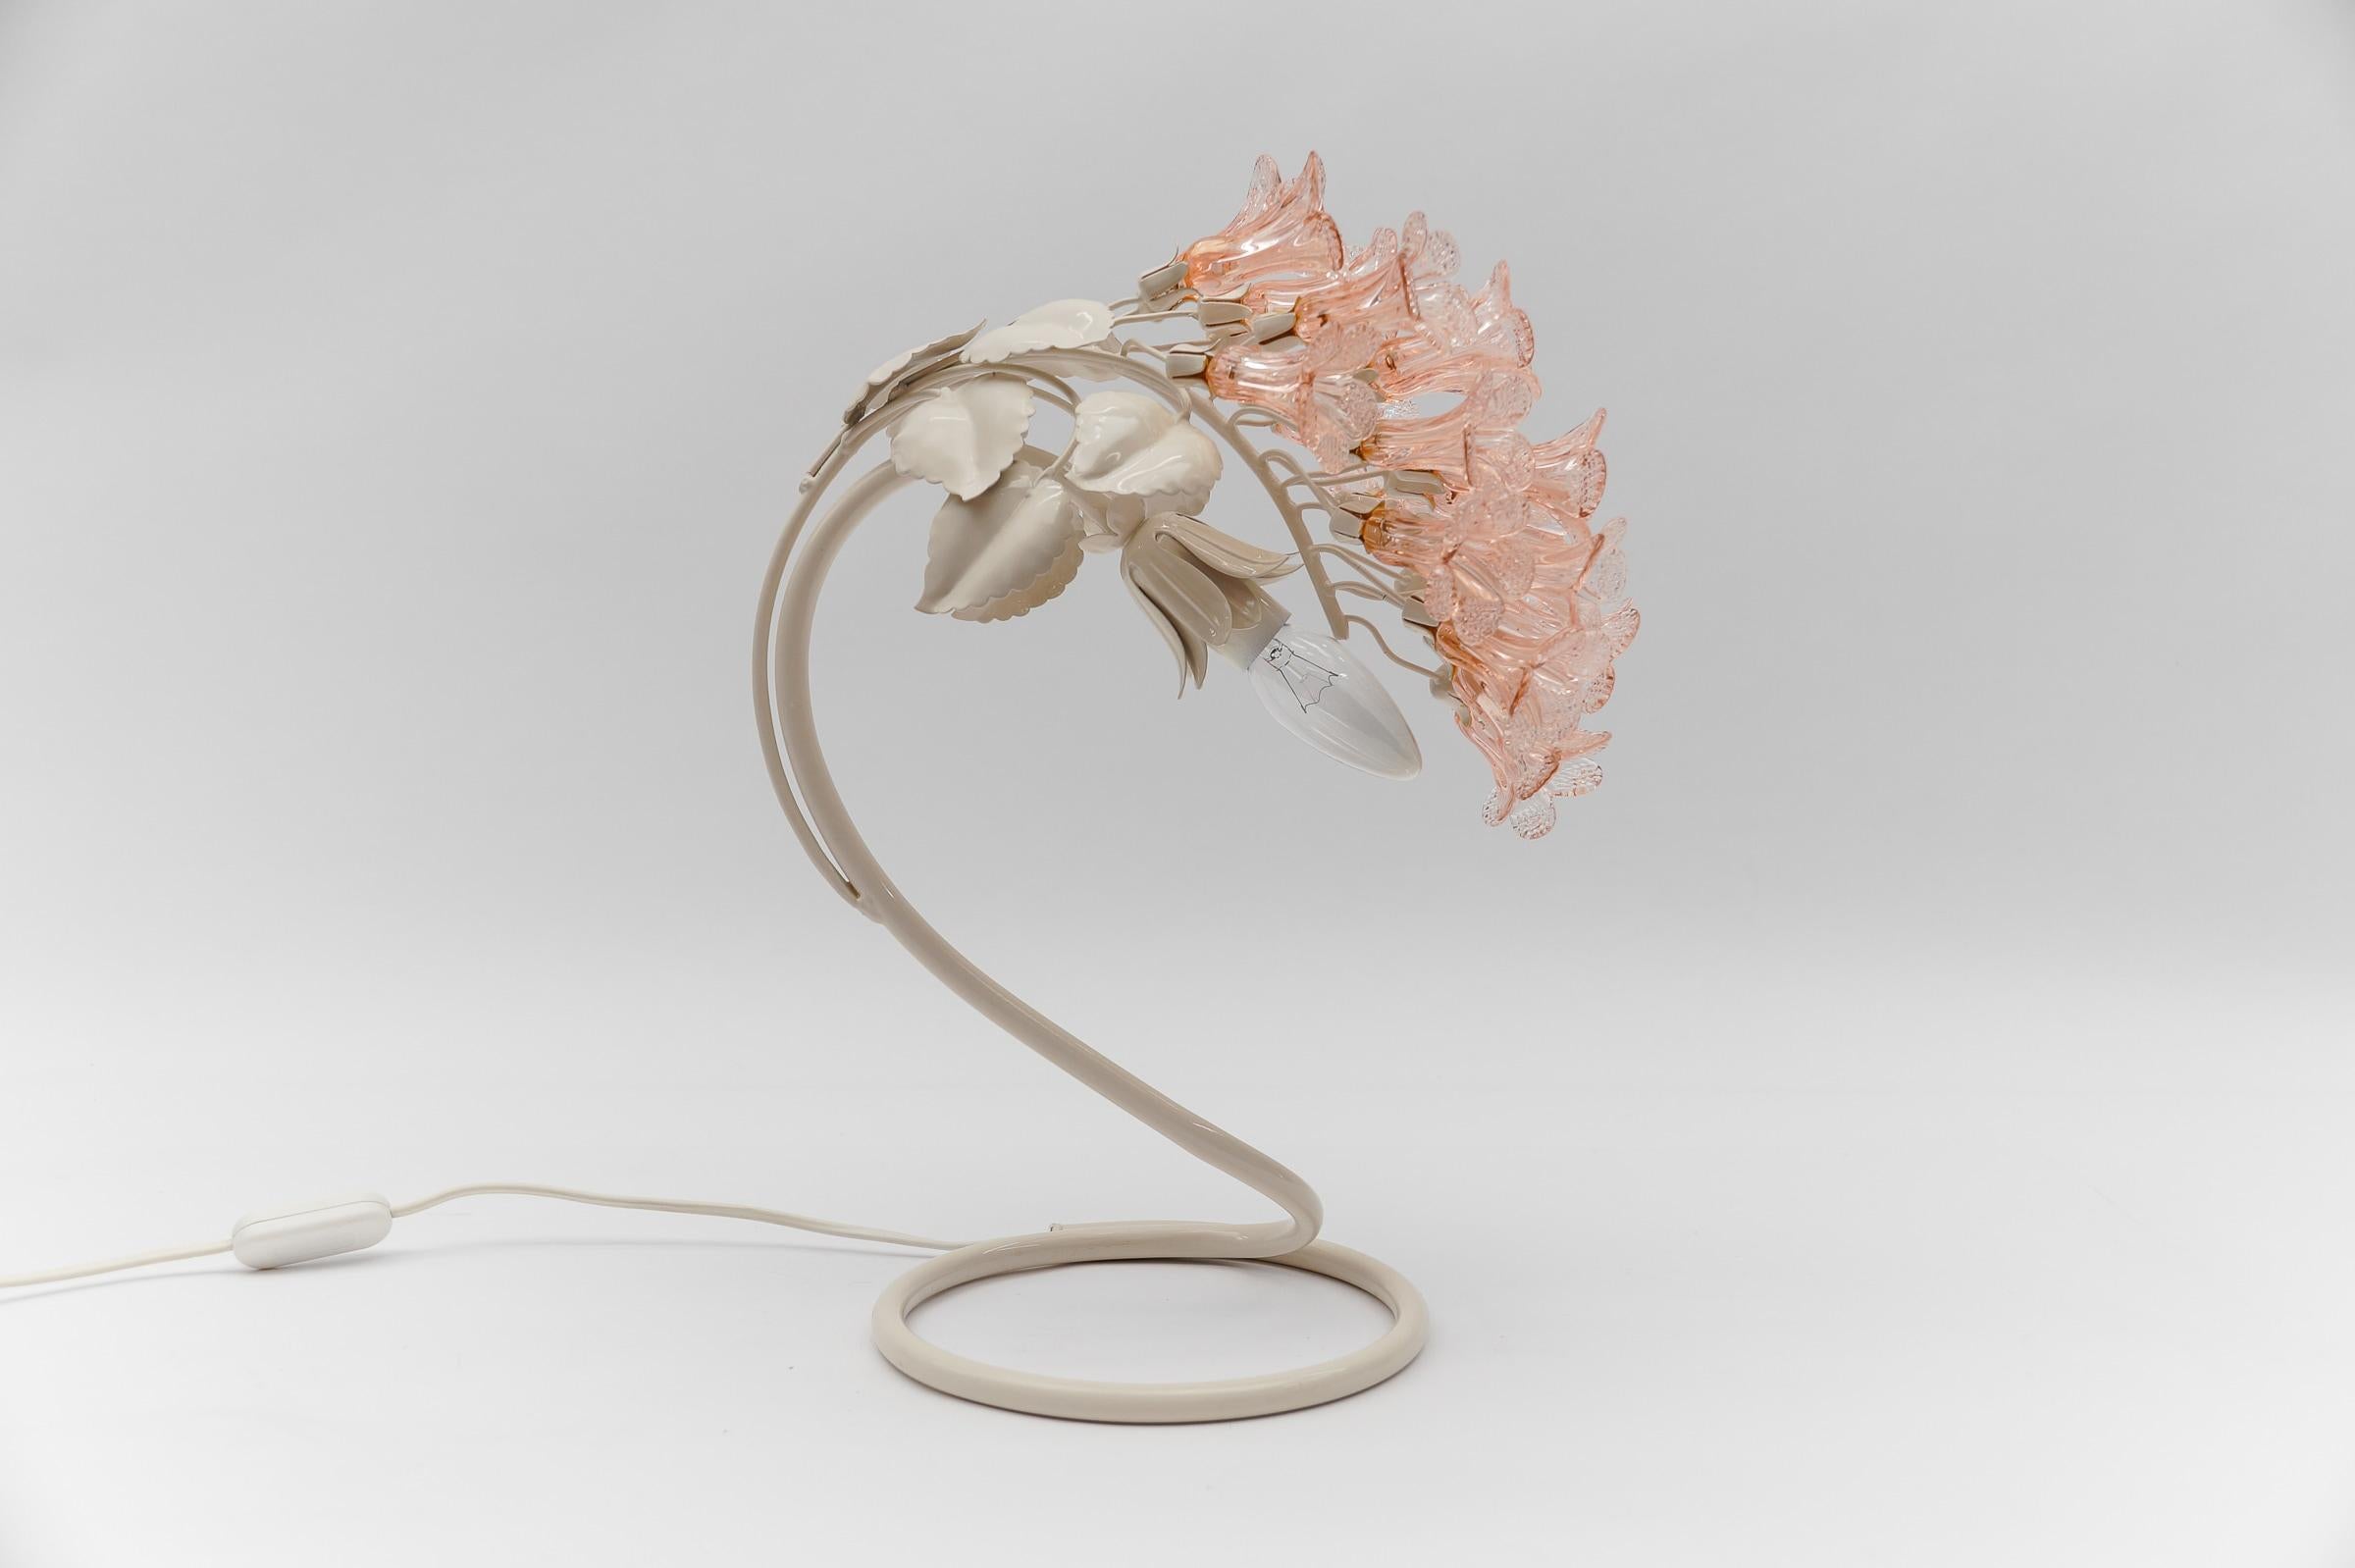 Mid-20th Century Italian Modern Table Lamp made in Pink Murano Glass Flowers, 1960s Italy For Sale